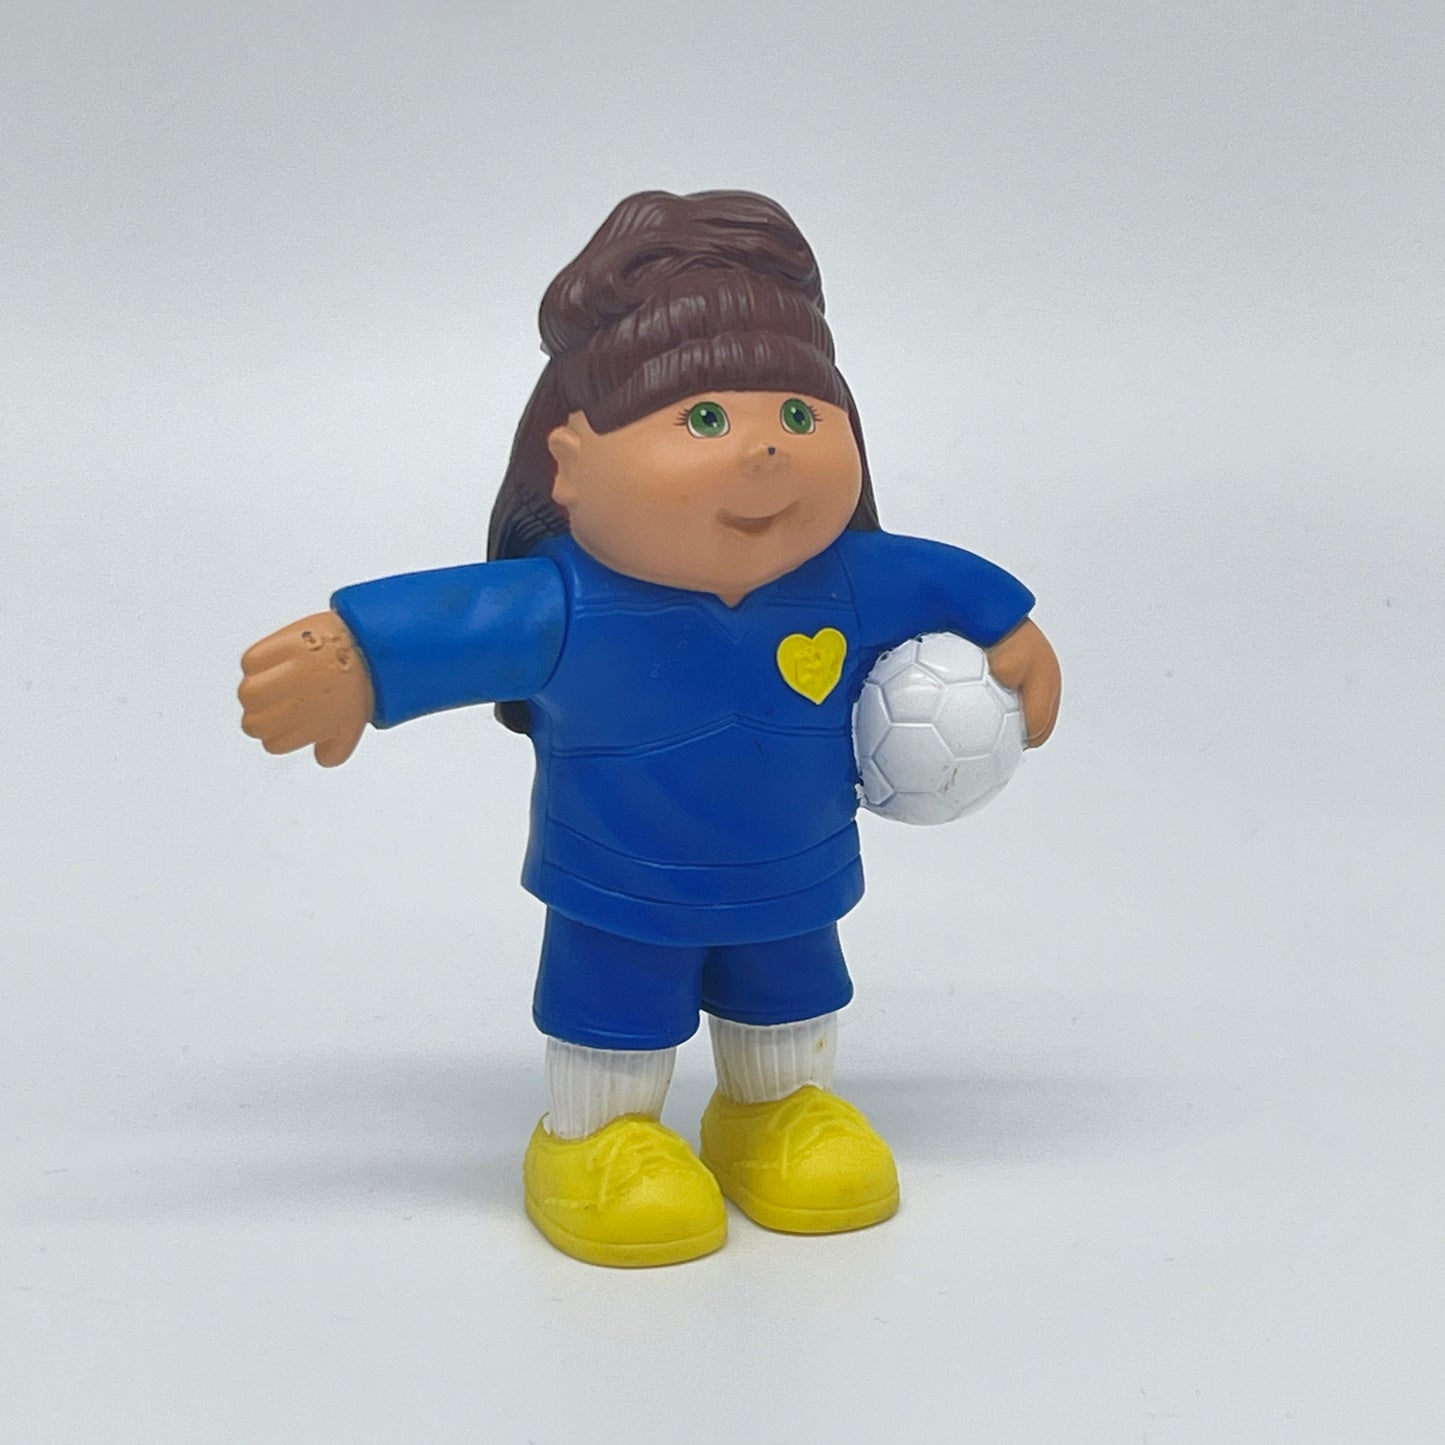 Burger King "Cabbage Patch Kids CPK Football" Jr. Meal Happy Meal (2012)